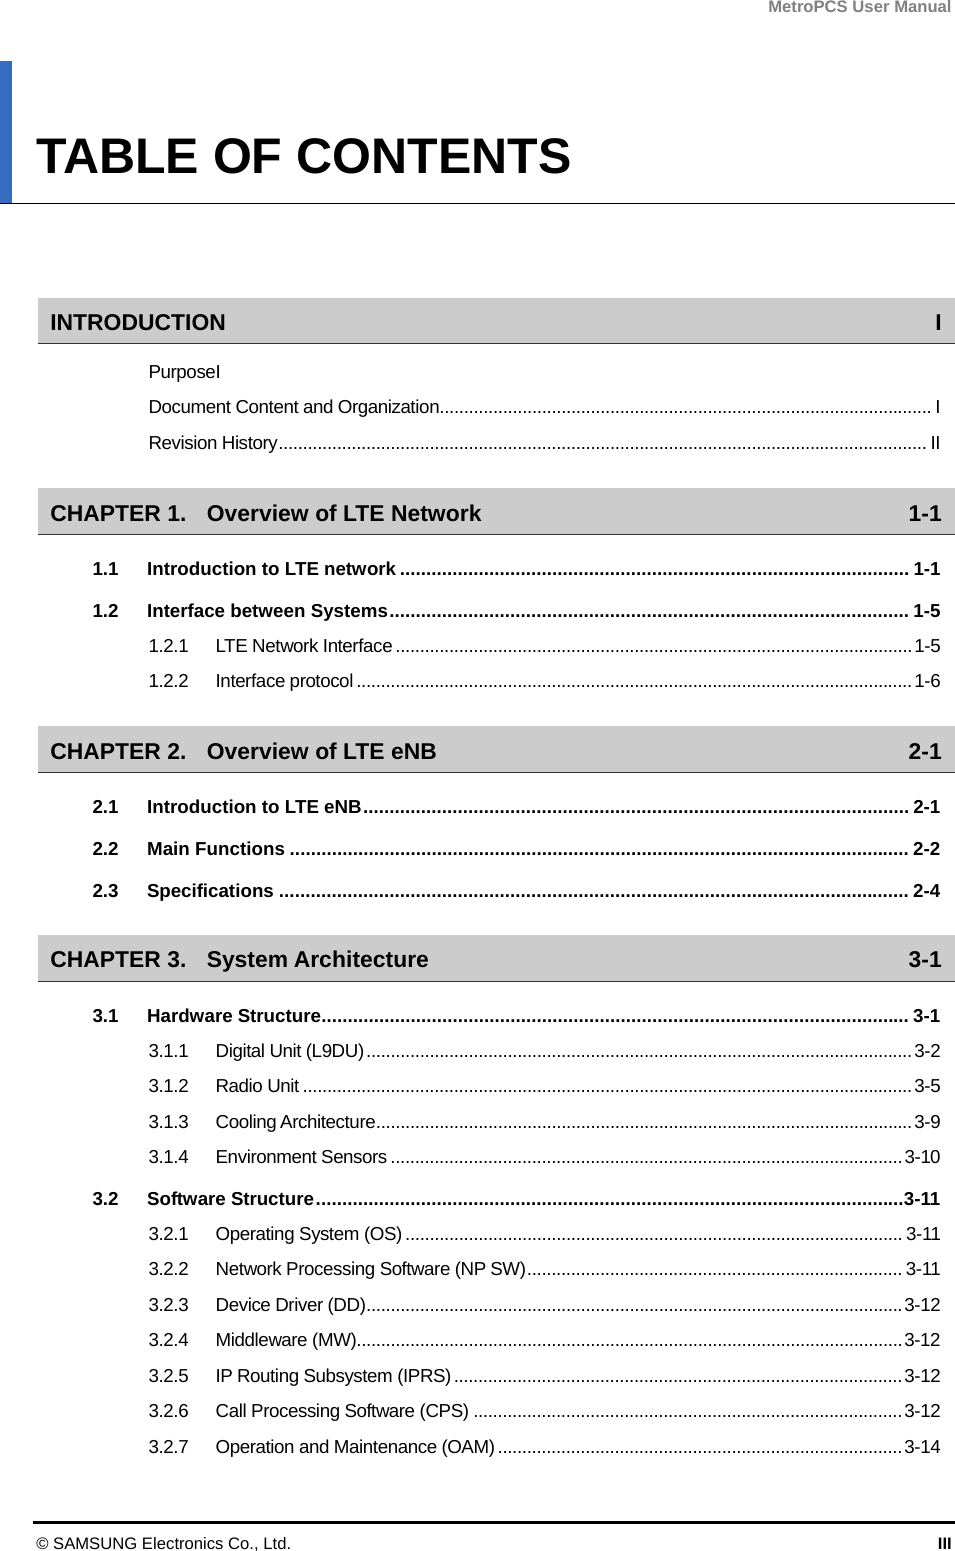 MetroPCS User Manual © SAMSUNG Electronics Co., Ltd.  III TABLE OF CONTENTS   INTRODUCTION I Purpose I Document Content and Organization..................................................................................................... I Revision History..................................................................................................................................... II CHAPTER 1. Overview of LTE Network  1-1 1.1 Introduction to LTE network ................................................................................................. 1-1 1.2 Interface between Systems................................................................................................... 1-5 1.2.1 LTE Network Interface ..........................................................................................................1-5 1.2.2 Interface protocol ..................................................................................................................1-6 CHAPTER 2. Overview of LTE eNB  2-1 2.1 Introduction to LTE eNB........................................................................................................ 2-1 2.2 Main Functions ...................................................................................................................... 2-2 2.3 Specifications ........................................................................................................................ 2-4 CHAPTER 3. System Architecture  3-1 3.1 Hardware Structure................................................................................................................ 3-1 3.1.1 Digital Unit (L9DU)................................................................................................................3-2 3.1.2 Radio Unit .............................................................................................................................3-5 3.1.3 Cooling Architecture..............................................................................................................3-9 3.1.4 Environment Sensors .........................................................................................................3-10 3.2 Software Structure................................................................................................................3-11 3.2.1 Operating System (OS) ...................................................................................................... 3-11 3.2.2 Network Processing Software (NP SW)............................................................................. 3-11 3.2.3 Device Driver (DD)..............................................................................................................3-12 3.2.4 Middleware (MW)................................................................................................................3-12 3.2.5 IP Routing Subsystem (IPRS)............................................................................................3-12 3.2.6 Call Processing Software (CPS) ........................................................................................3-12 3.2.7 Operation and Maintenance (OAM) ...................................................................................3-14 